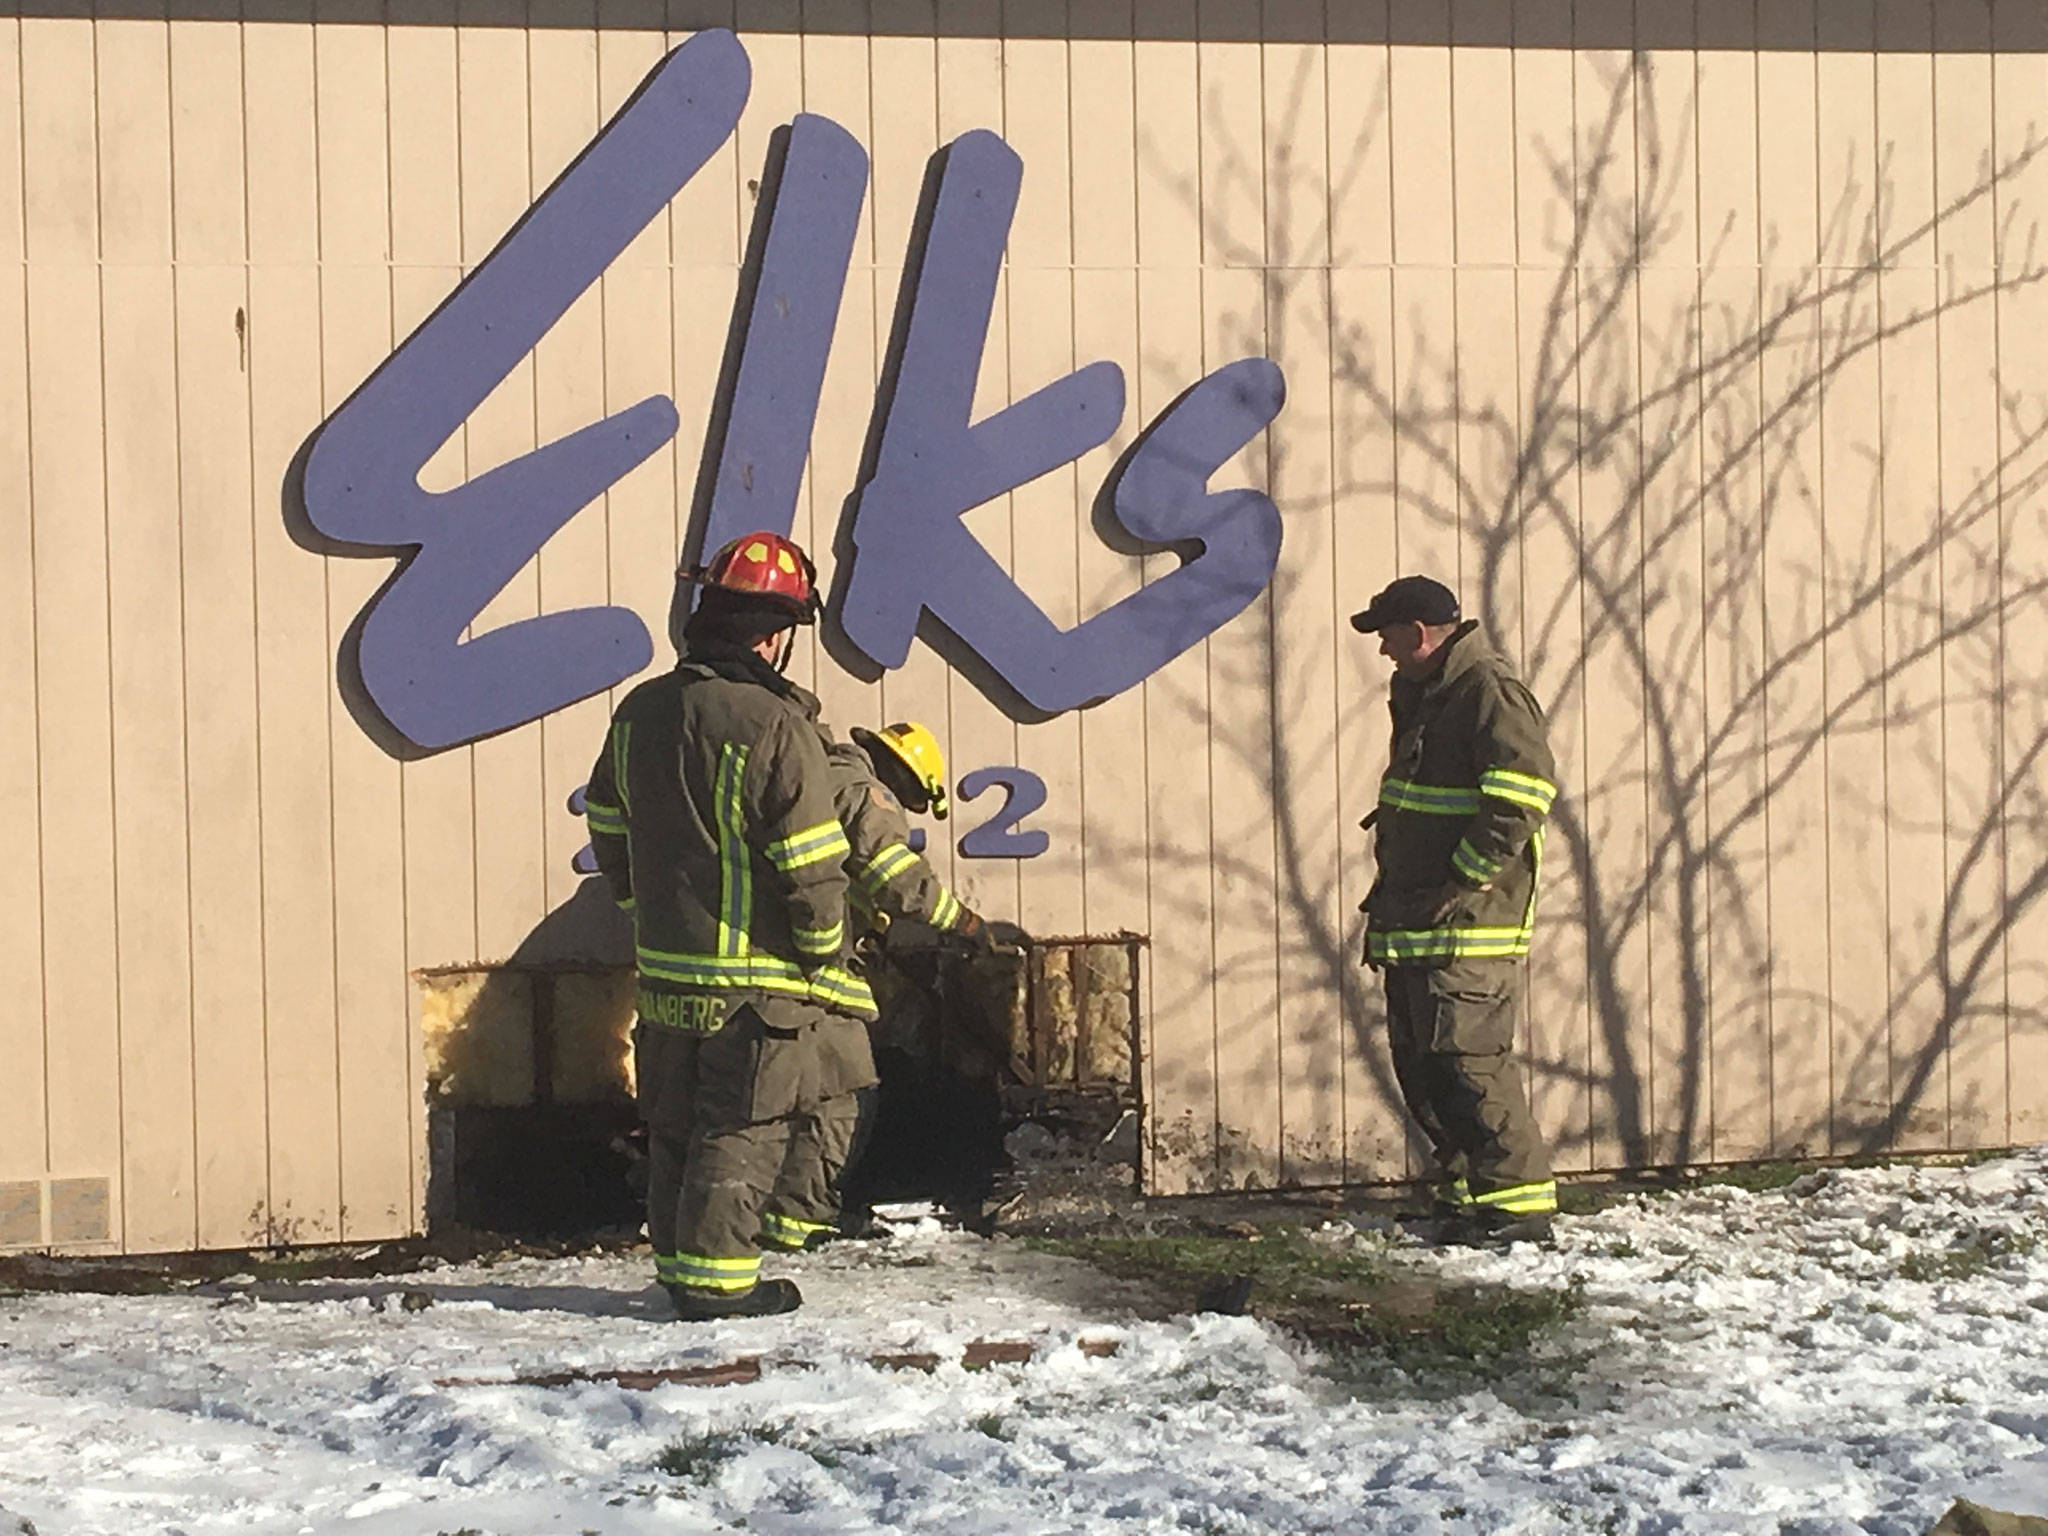 Clallam County Fire District 3 personnel respond to a fire at the Sequim Elks Lodge on Feb. 19. Submitted photo